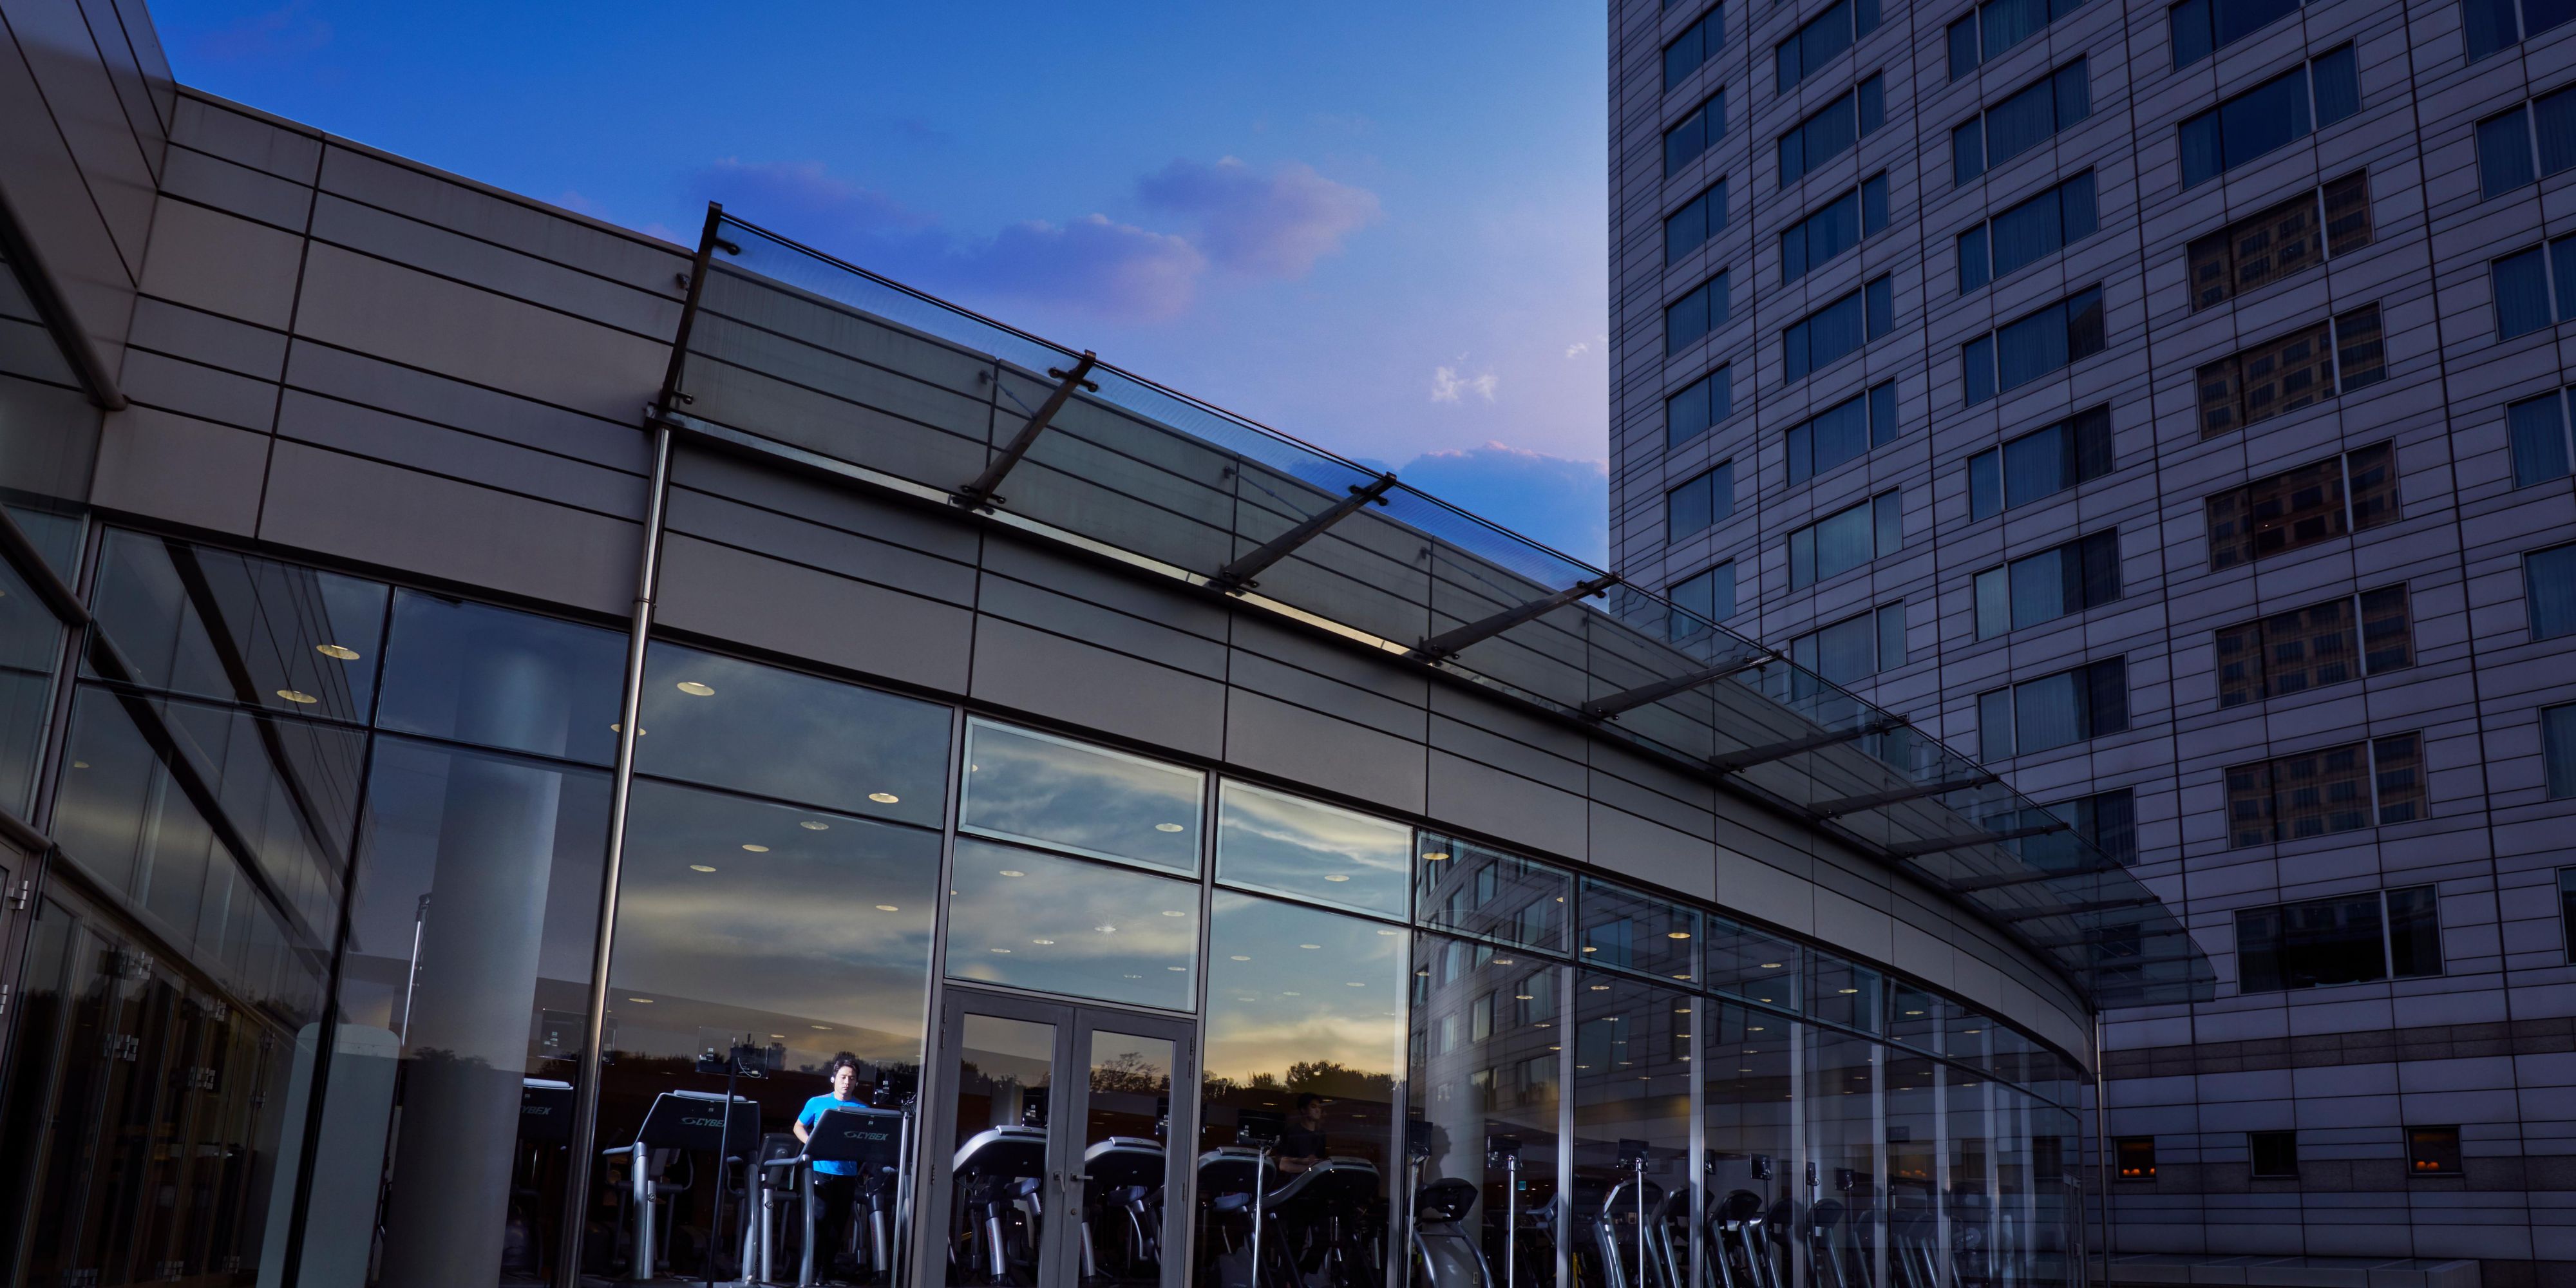 Enjoy an invigorating workout at the Cosmopolitan Fitness Club, bathed in natural daylight from the floor-to-ceiling glass windows and fitted with modern fitness equipment; the 25-metre indoor swimming pool; and the aerobics
studio, accompanied by breathtaking views of Bongeunsa Temple.